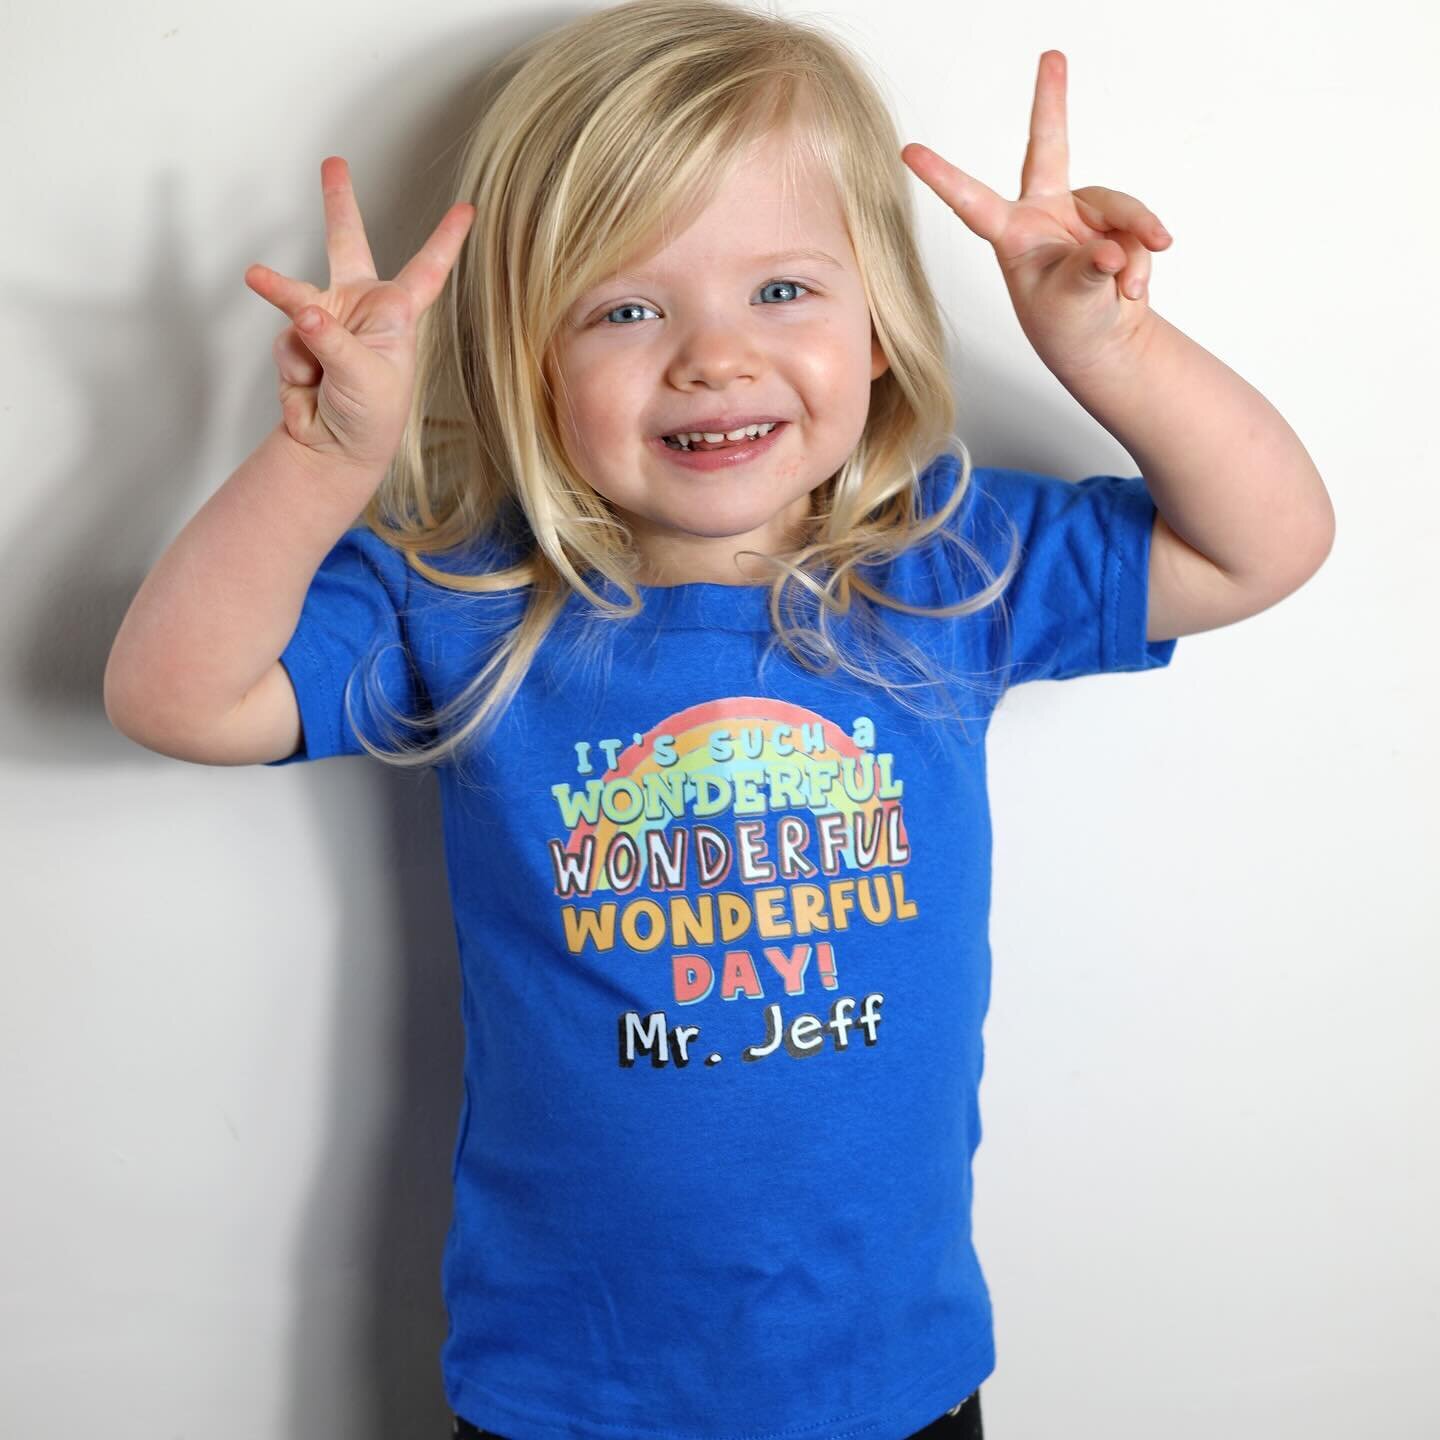 I&rsquo;m running a thing on my merch st0re! Kids shirts, Adult shirts and of course, digital / CD copies of my new album &ldquo;Wonderful Wonderful Wonderful&rdquo; 💙&hearts;️💙🫶🏼
🔗 in bi00000